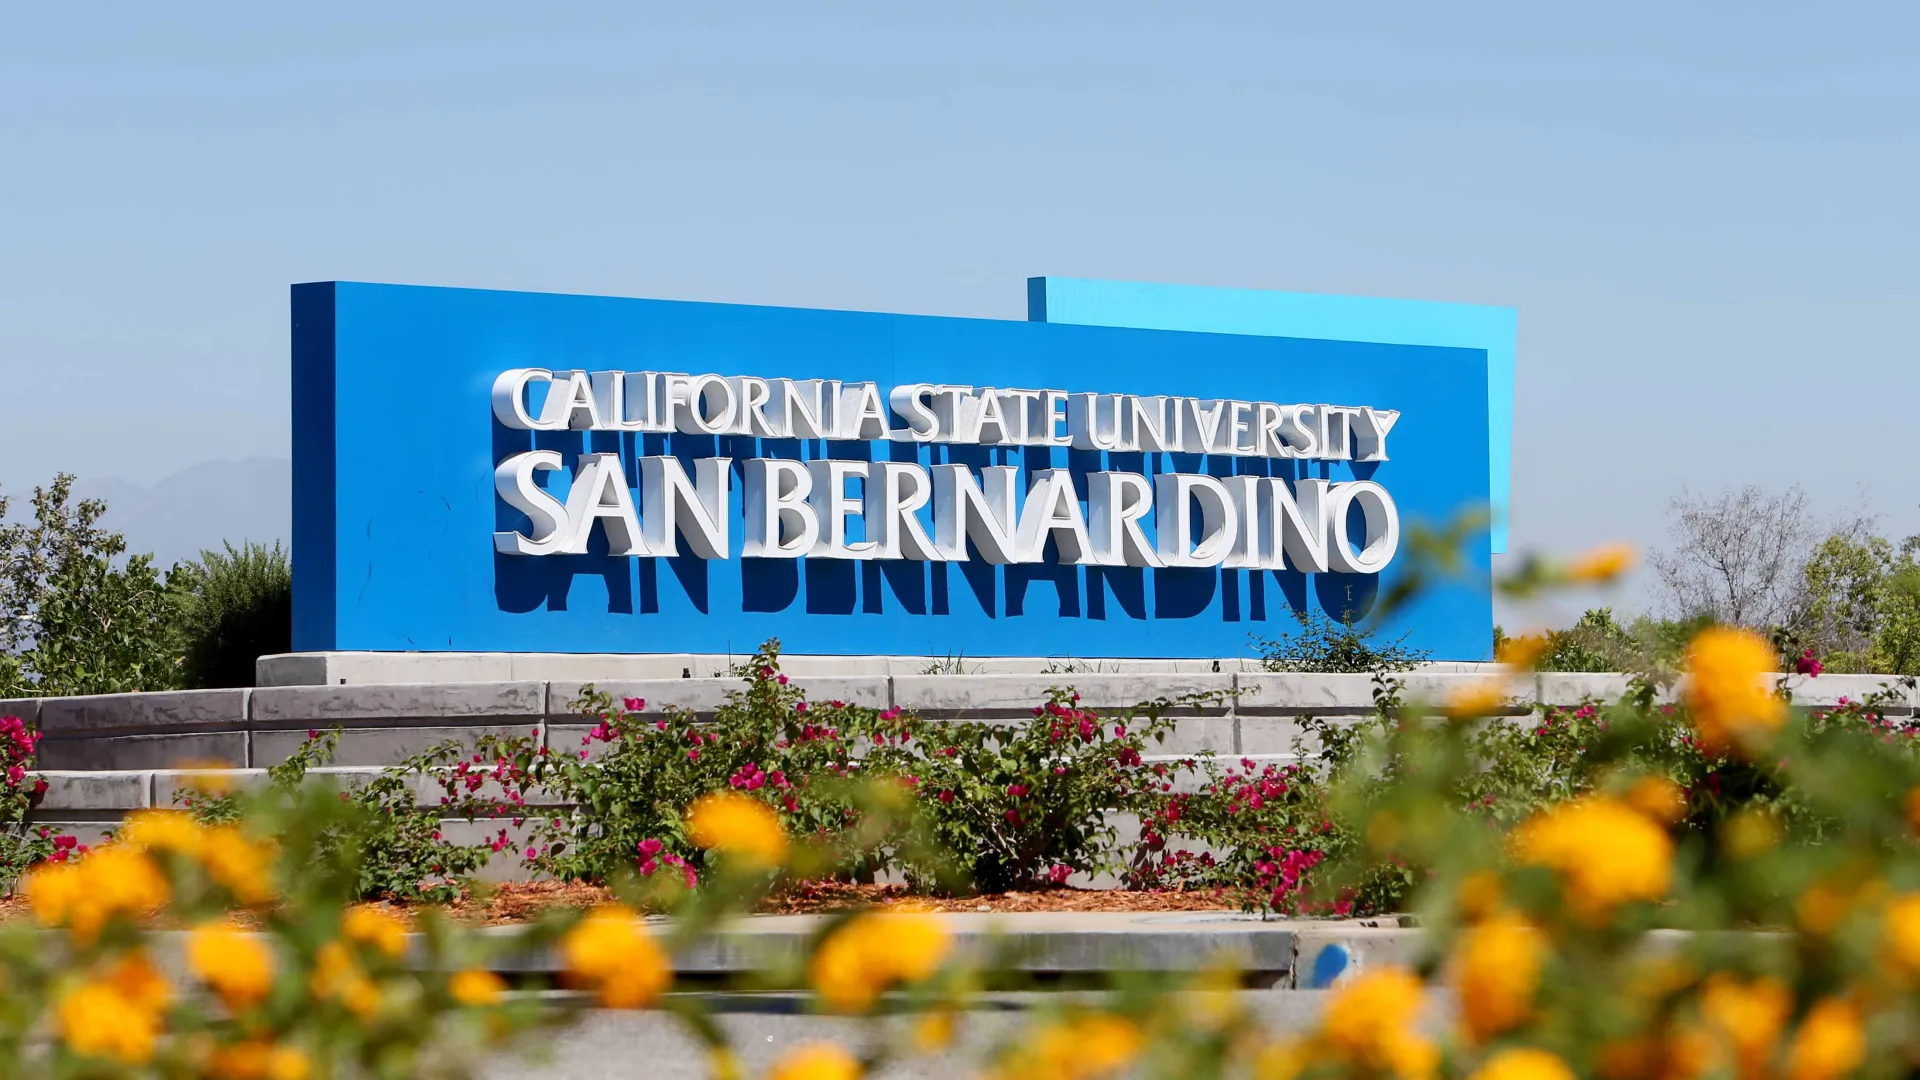 The entrance to CSUSB.